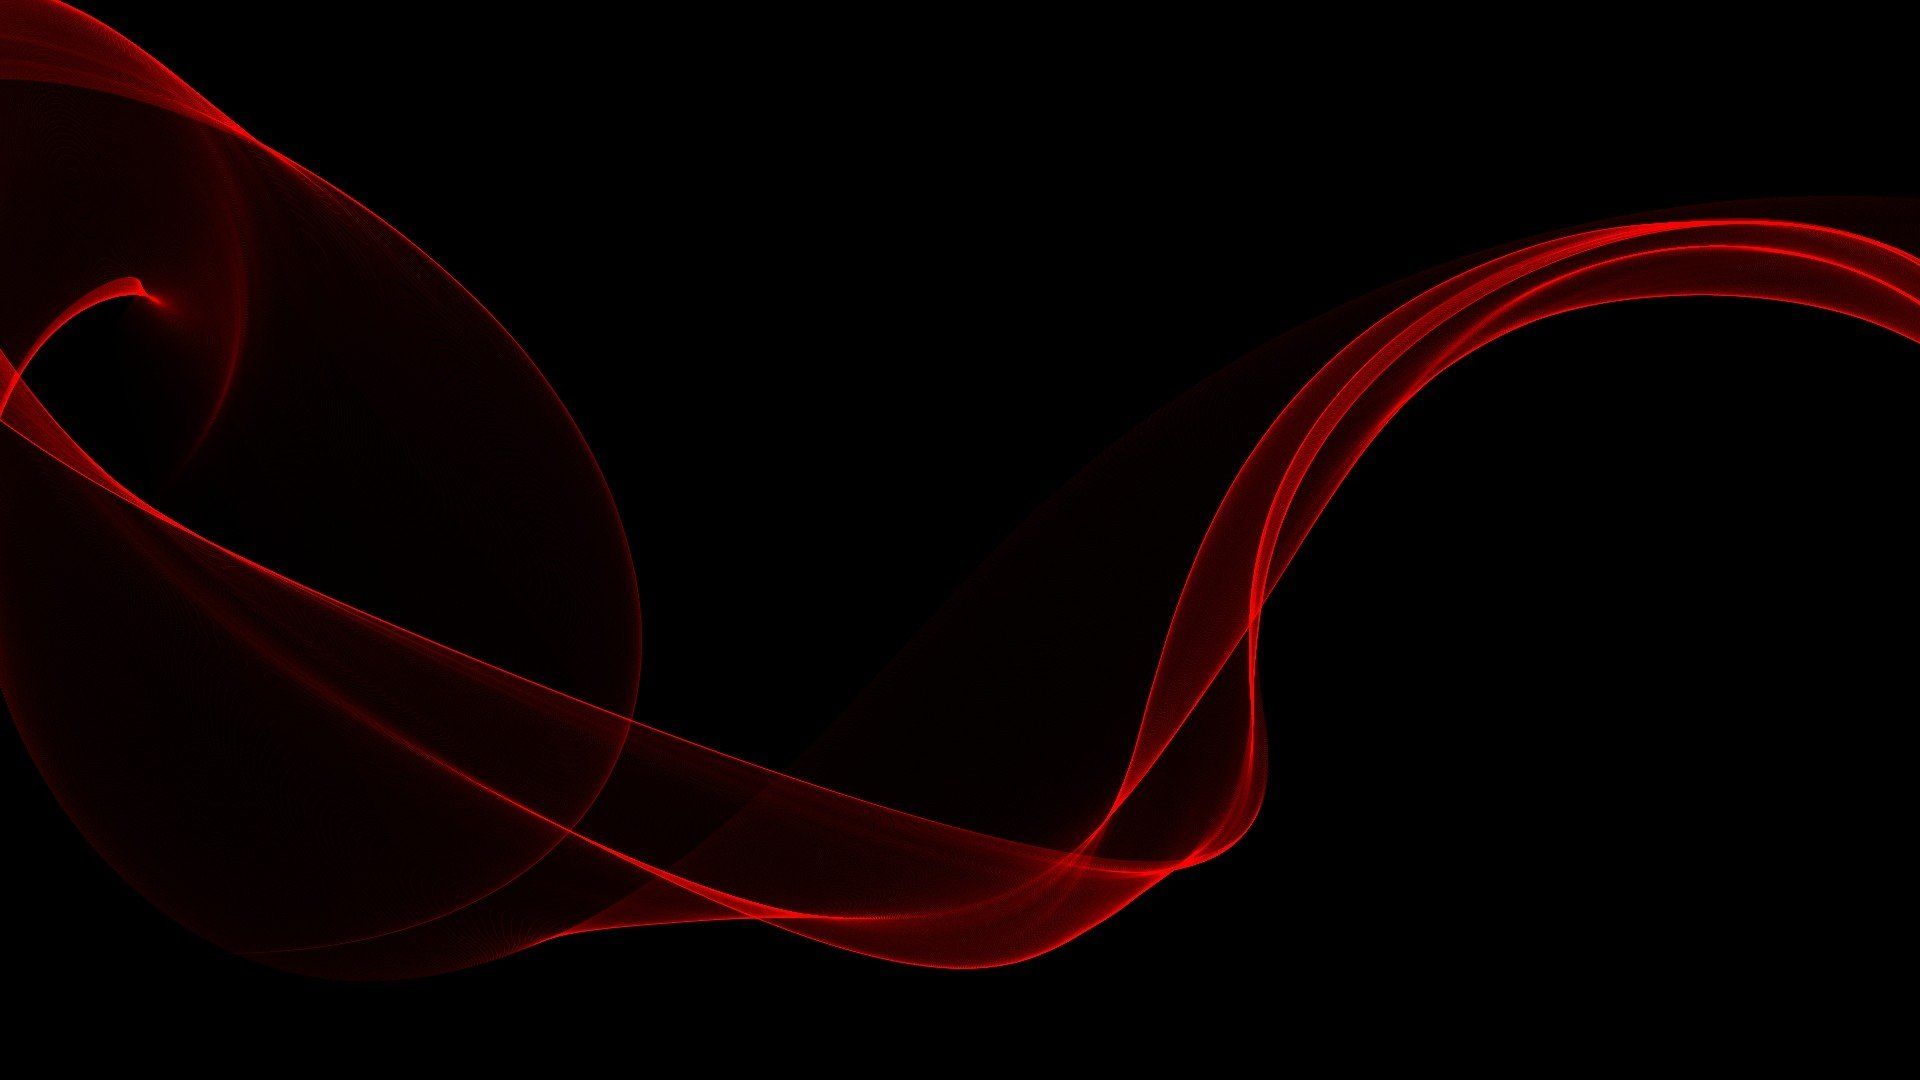 Free download Abstract Black Wallpaper 1920x1080 Abstract Black Minimalistic [1920x1080] for your Desktop, Mobile & Tablet. Explore Black Abstract Wallpaper HD. Black And Red Abstract Wallpaper, Abstract Art Wallpaper